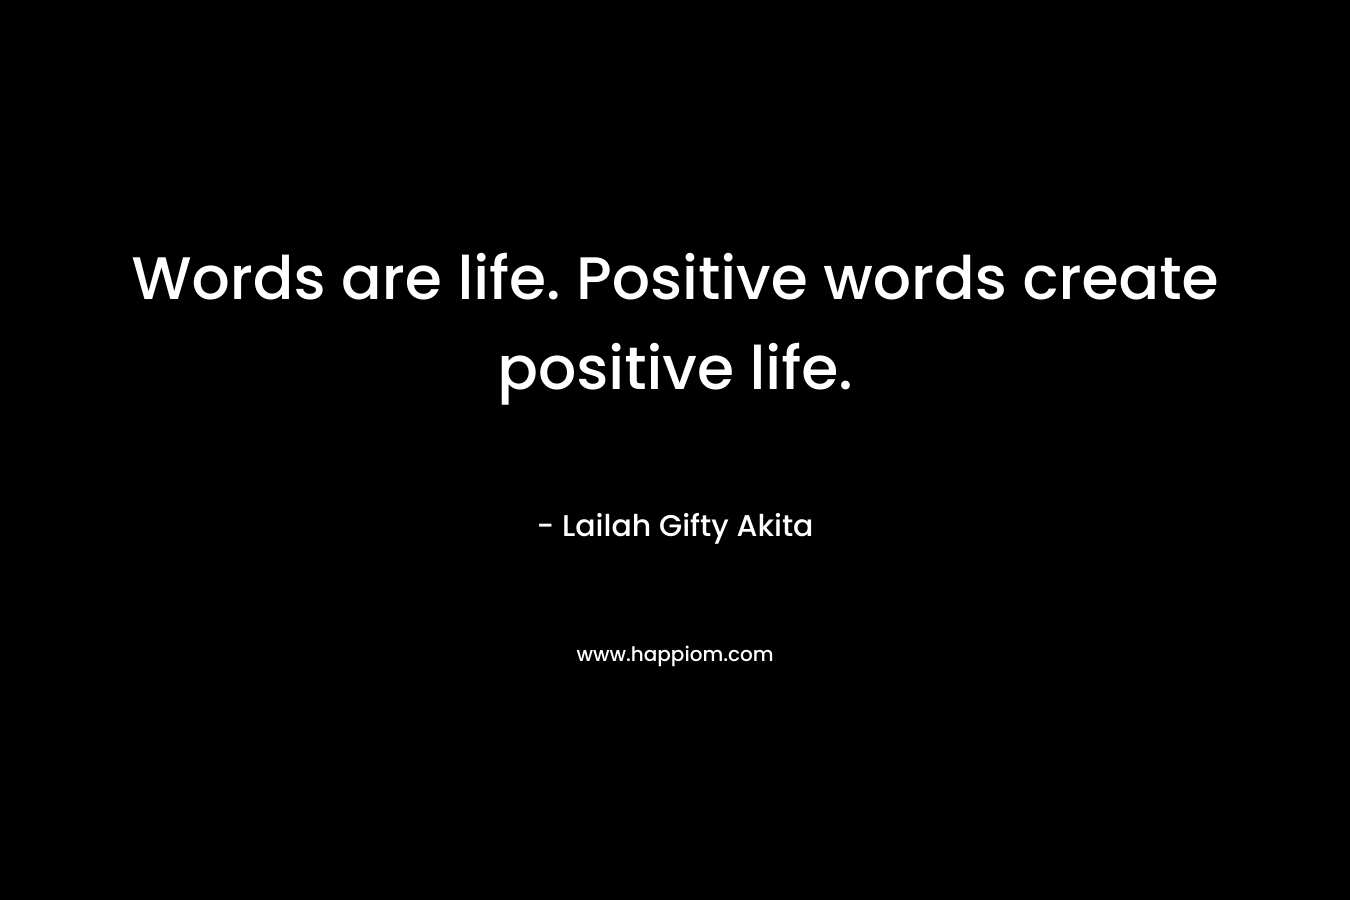 Words are life. Positive words create positive life.